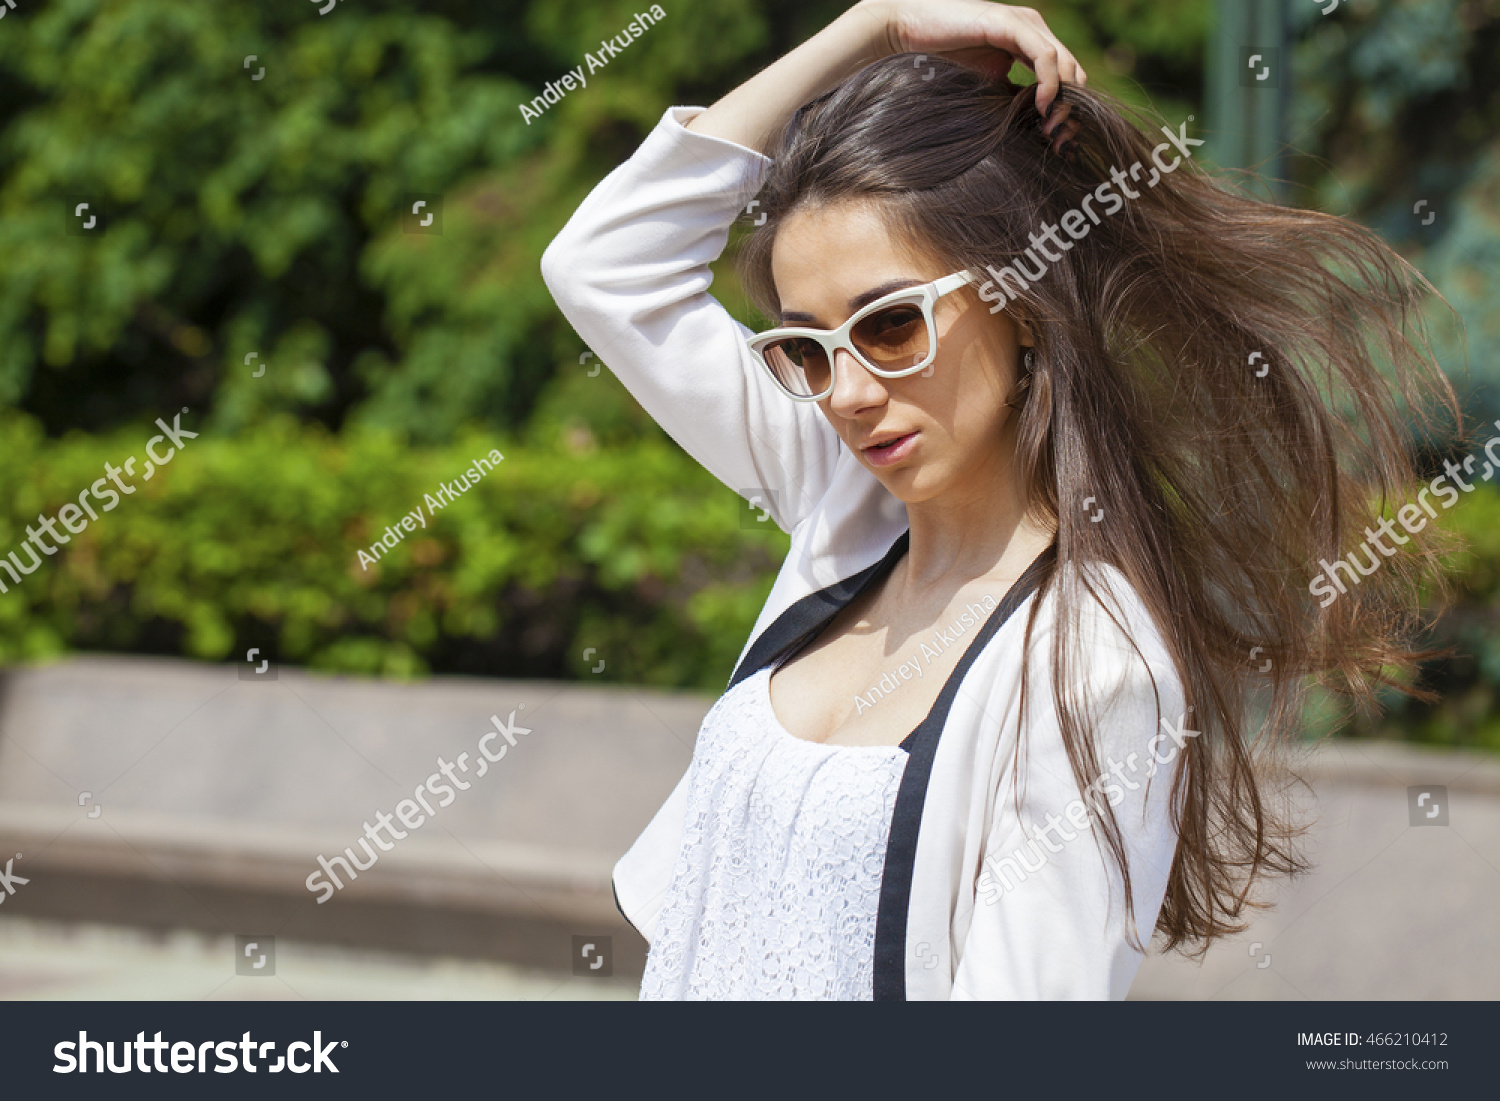 Portrait close up of young beautiful brunette woman in white fashion sunglasses, summer street outdoors #466210412